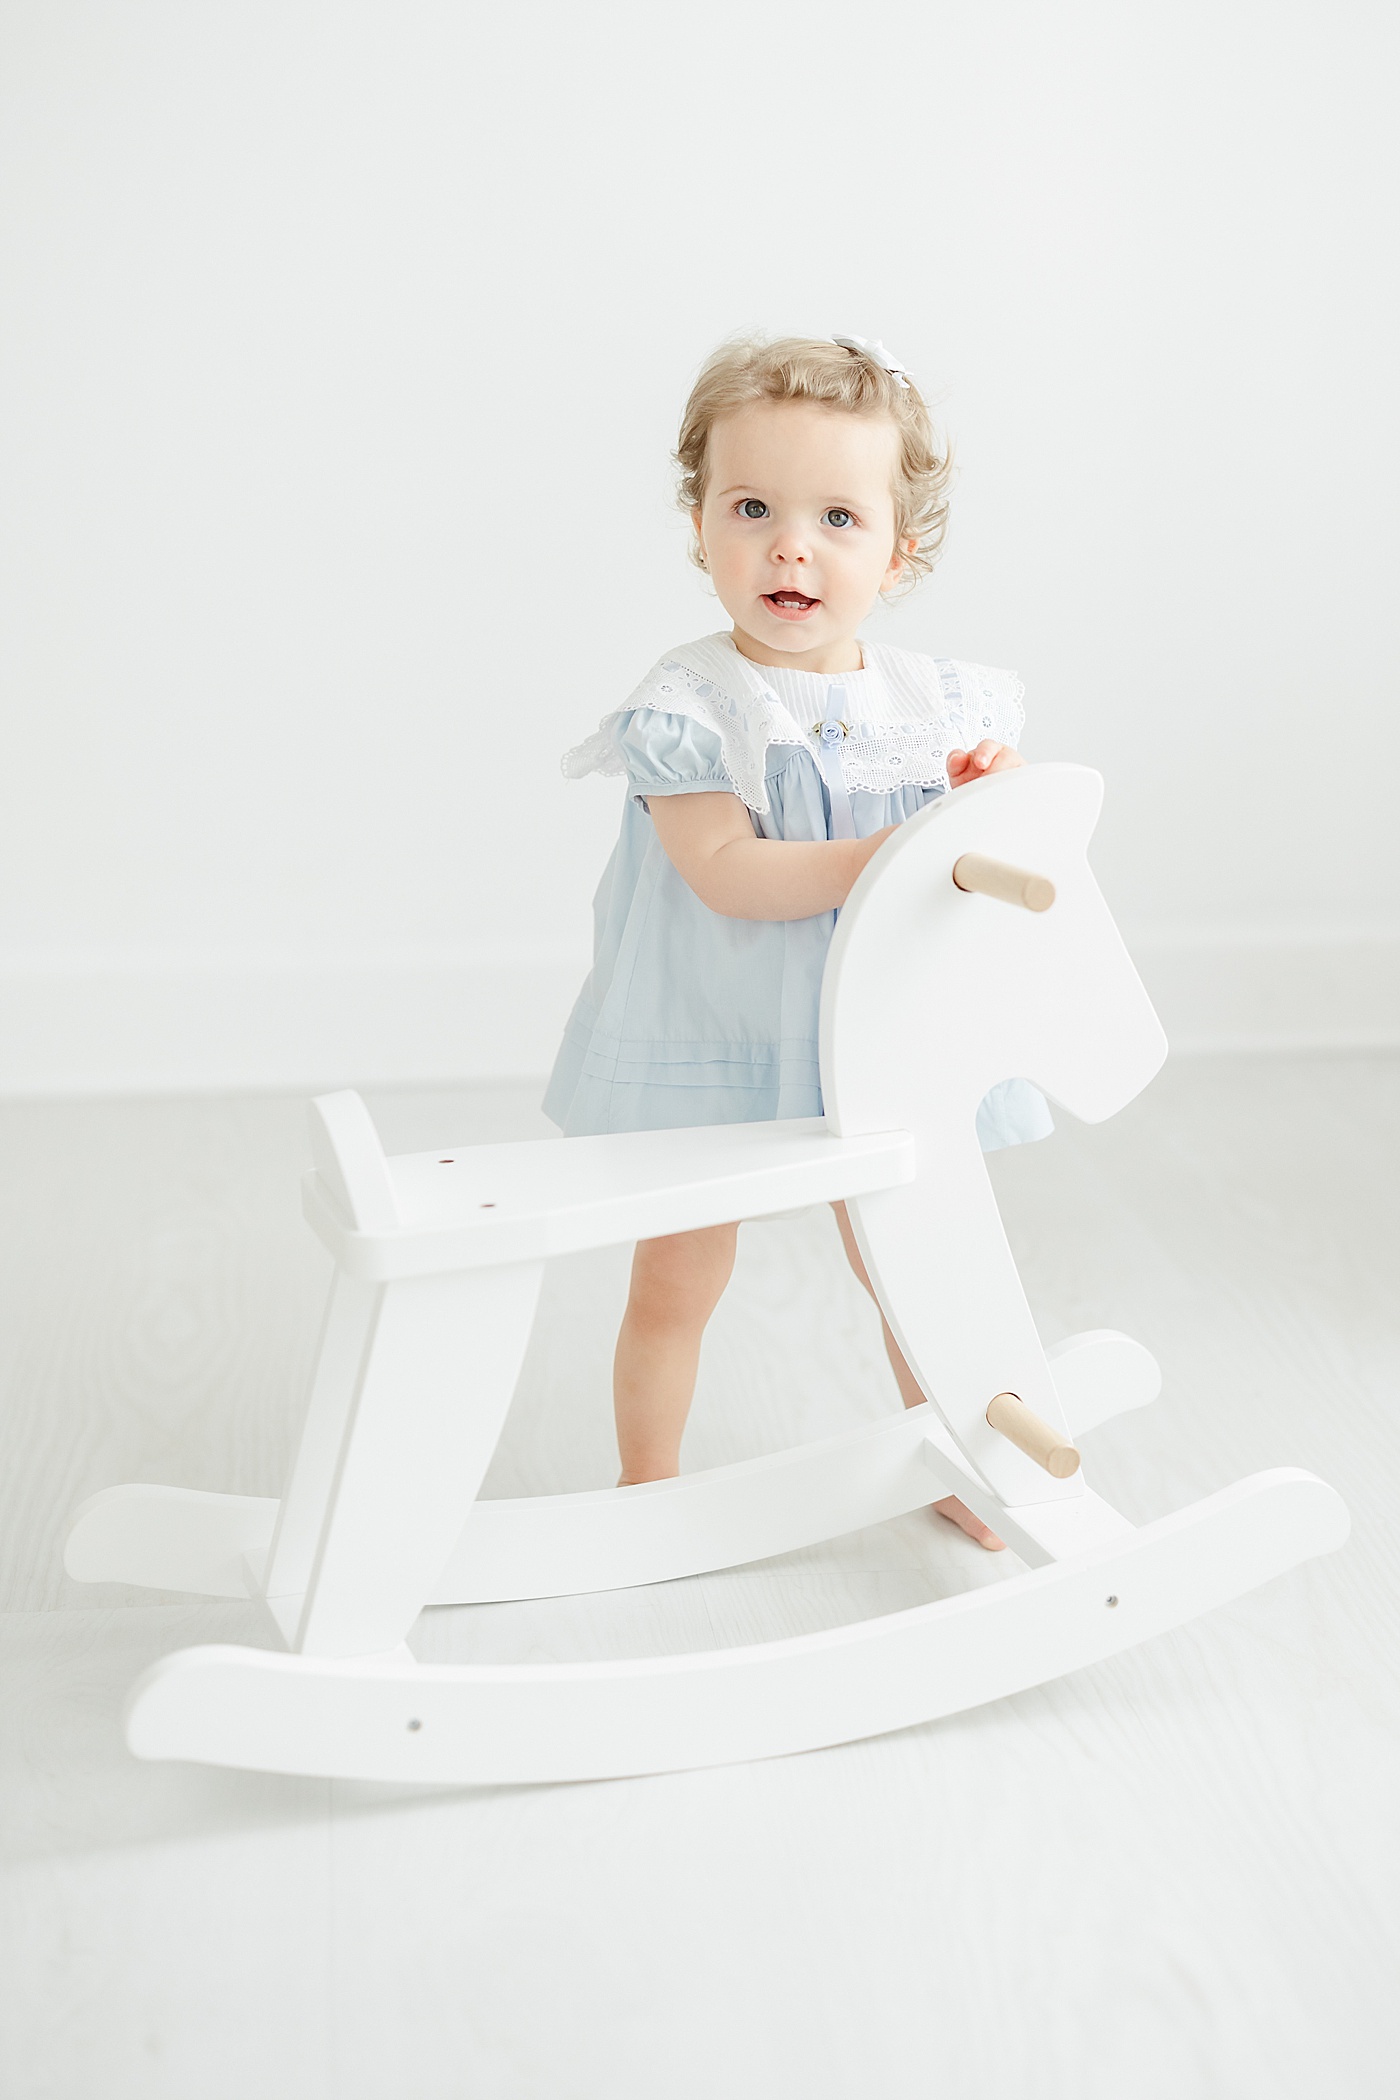 One year old riding a rocking horse during first birthday photoshoot with Kristin Wood Photography.